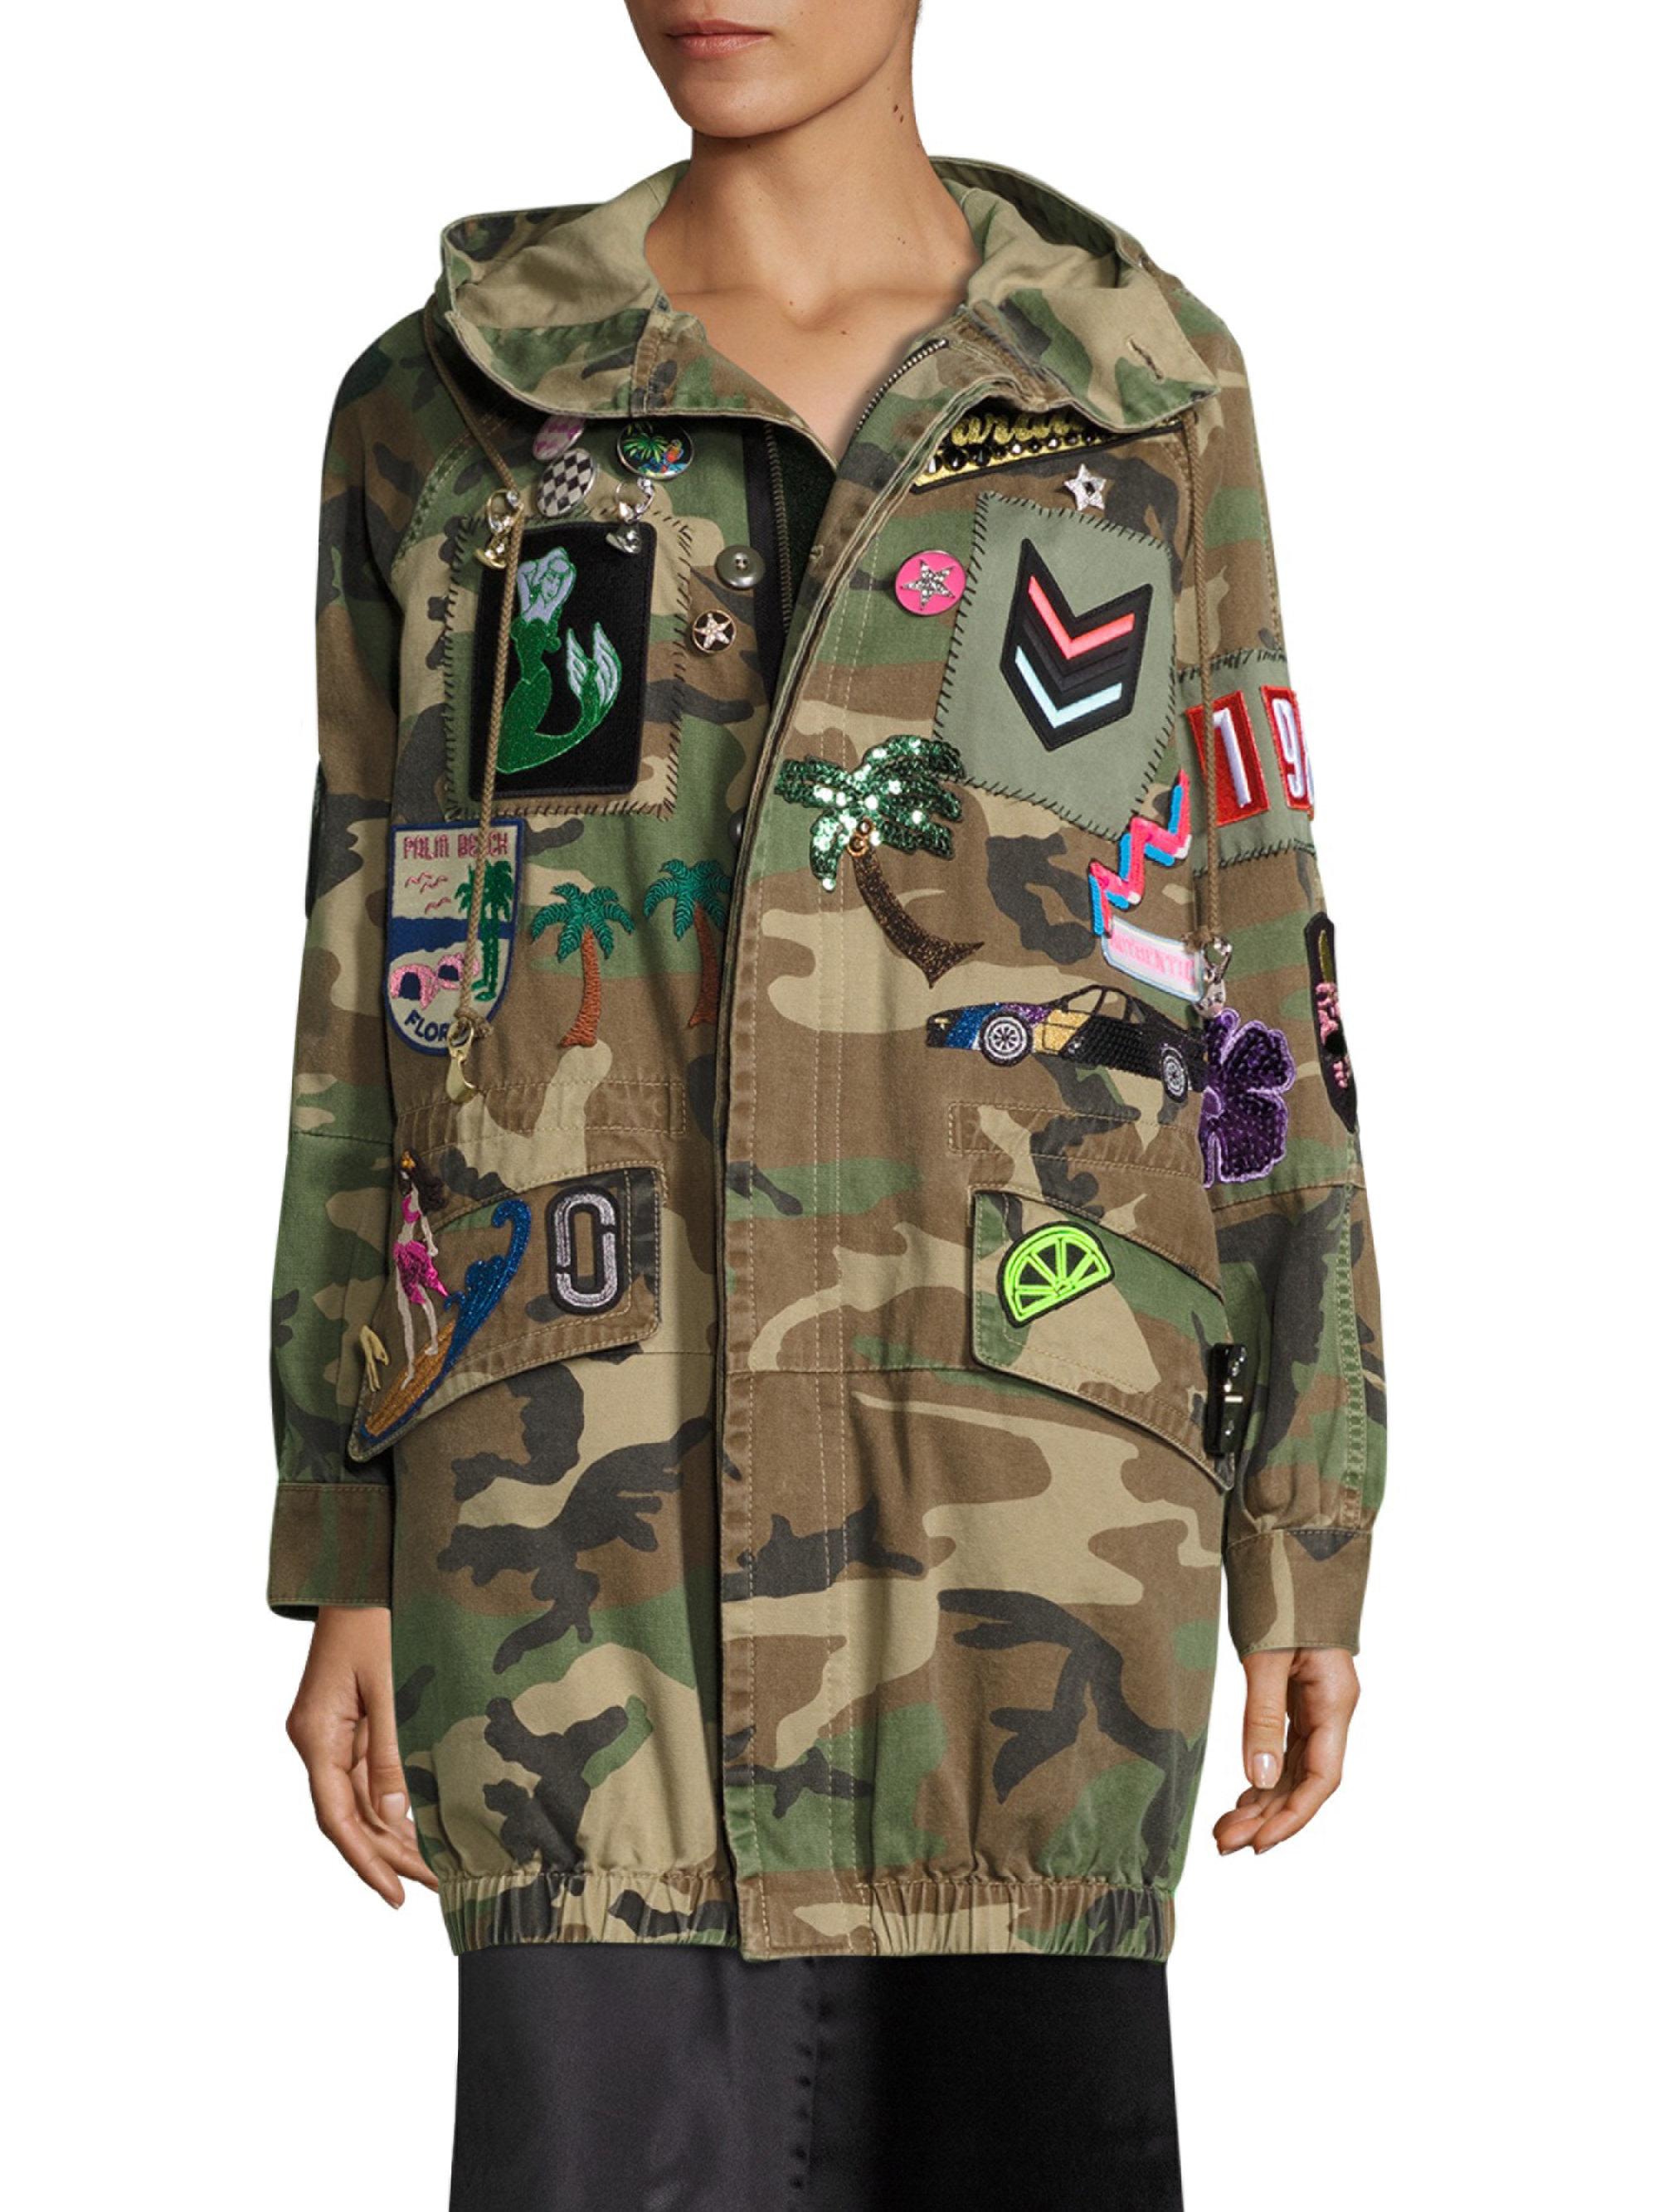 Marc Jacobs Hooded Camouflage Anorak Jacket in Green | Lyst